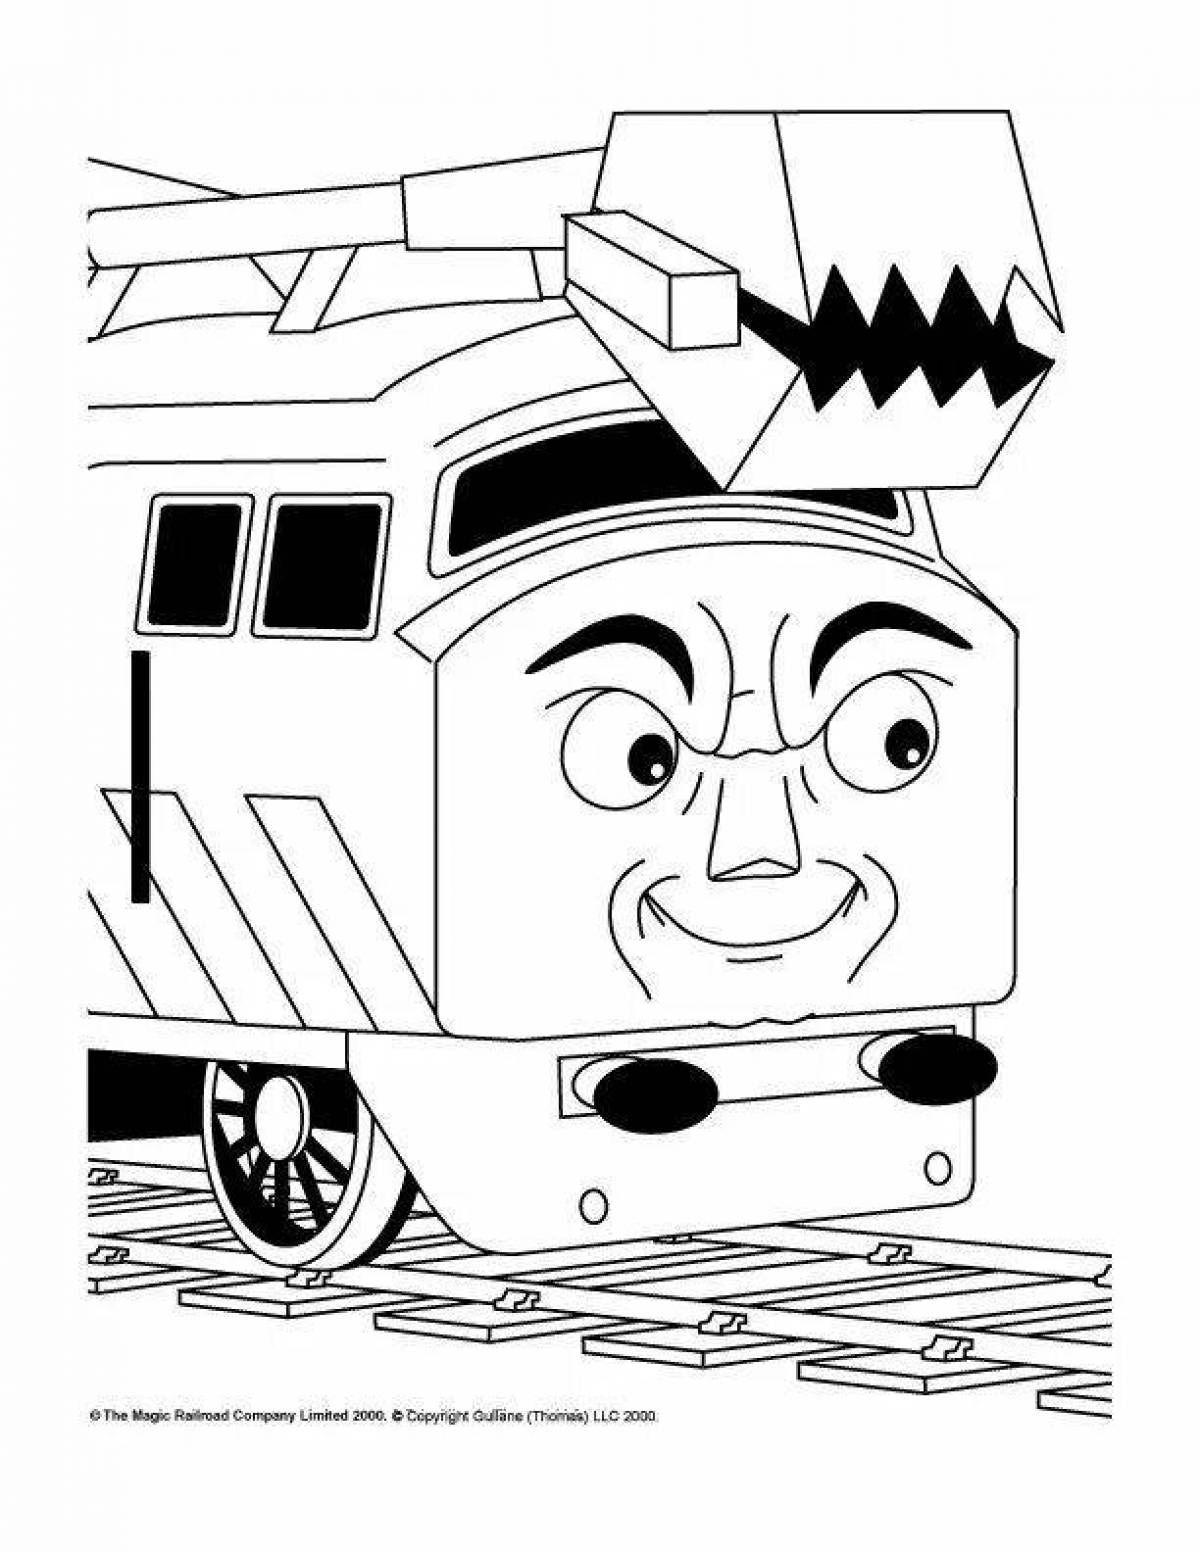 Great train eater coloring page